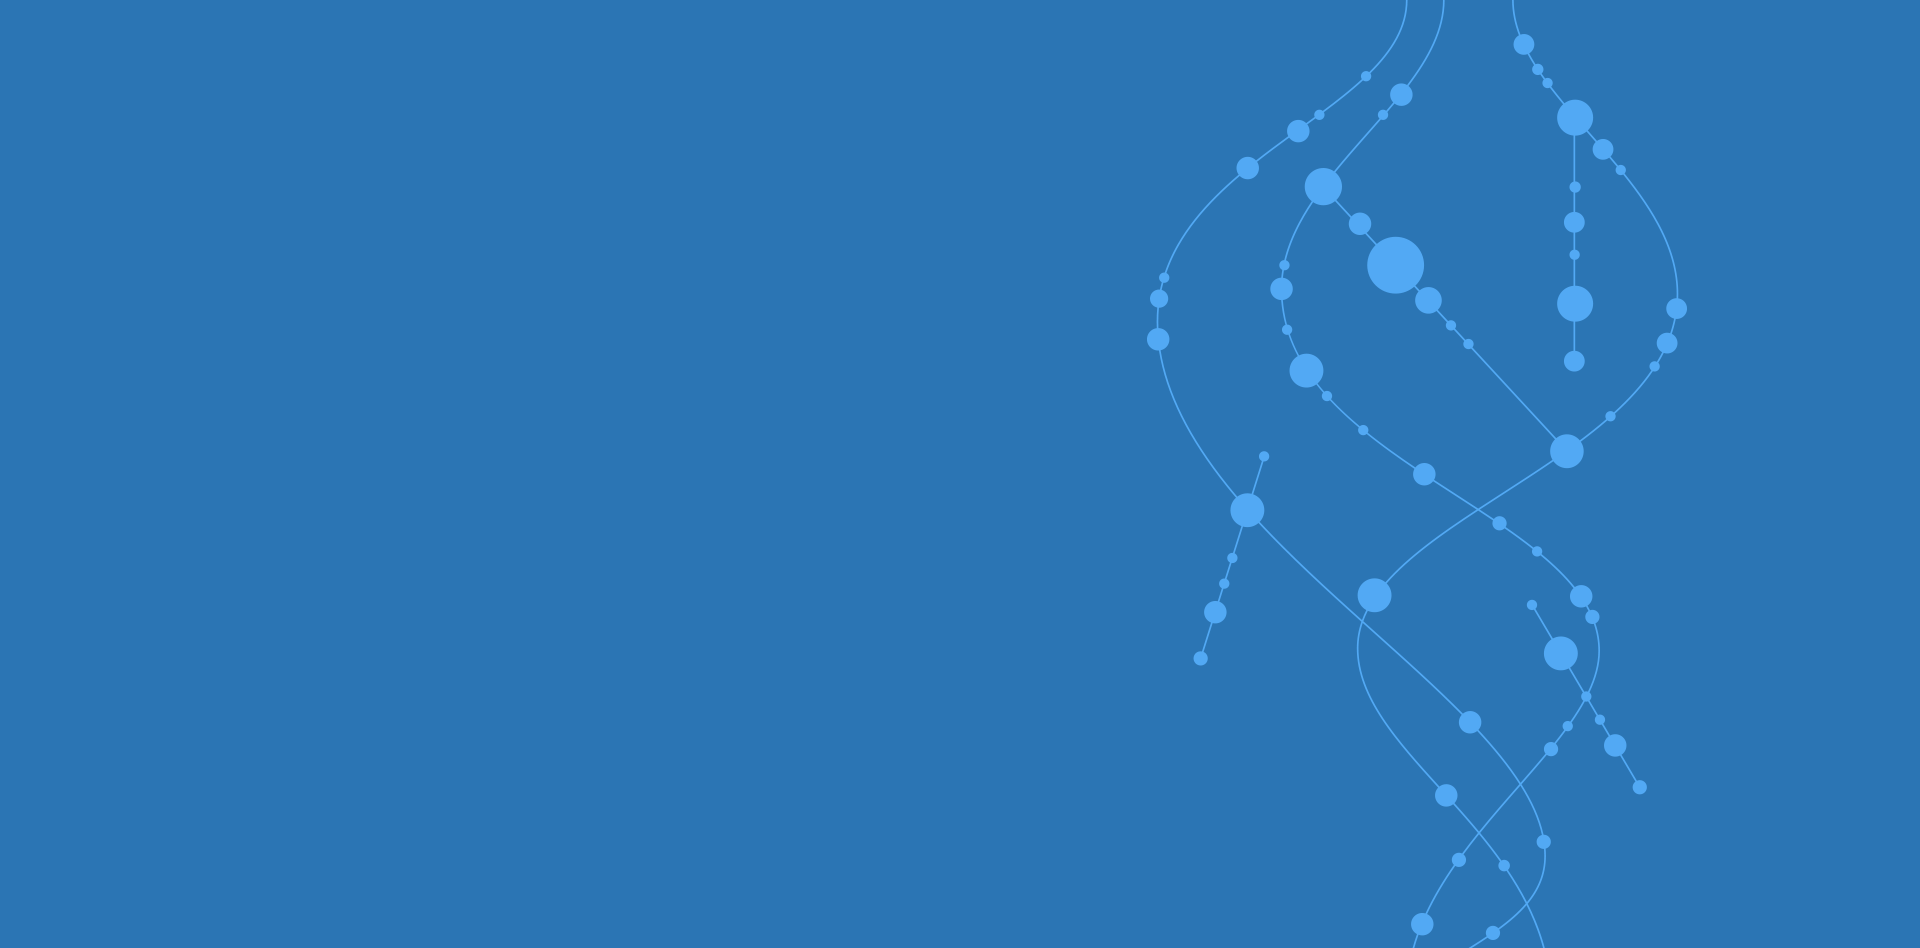 An image of a dna molecule on a dark blue background - Forecast Technology Product marking solutions with synthetic DNA tracers